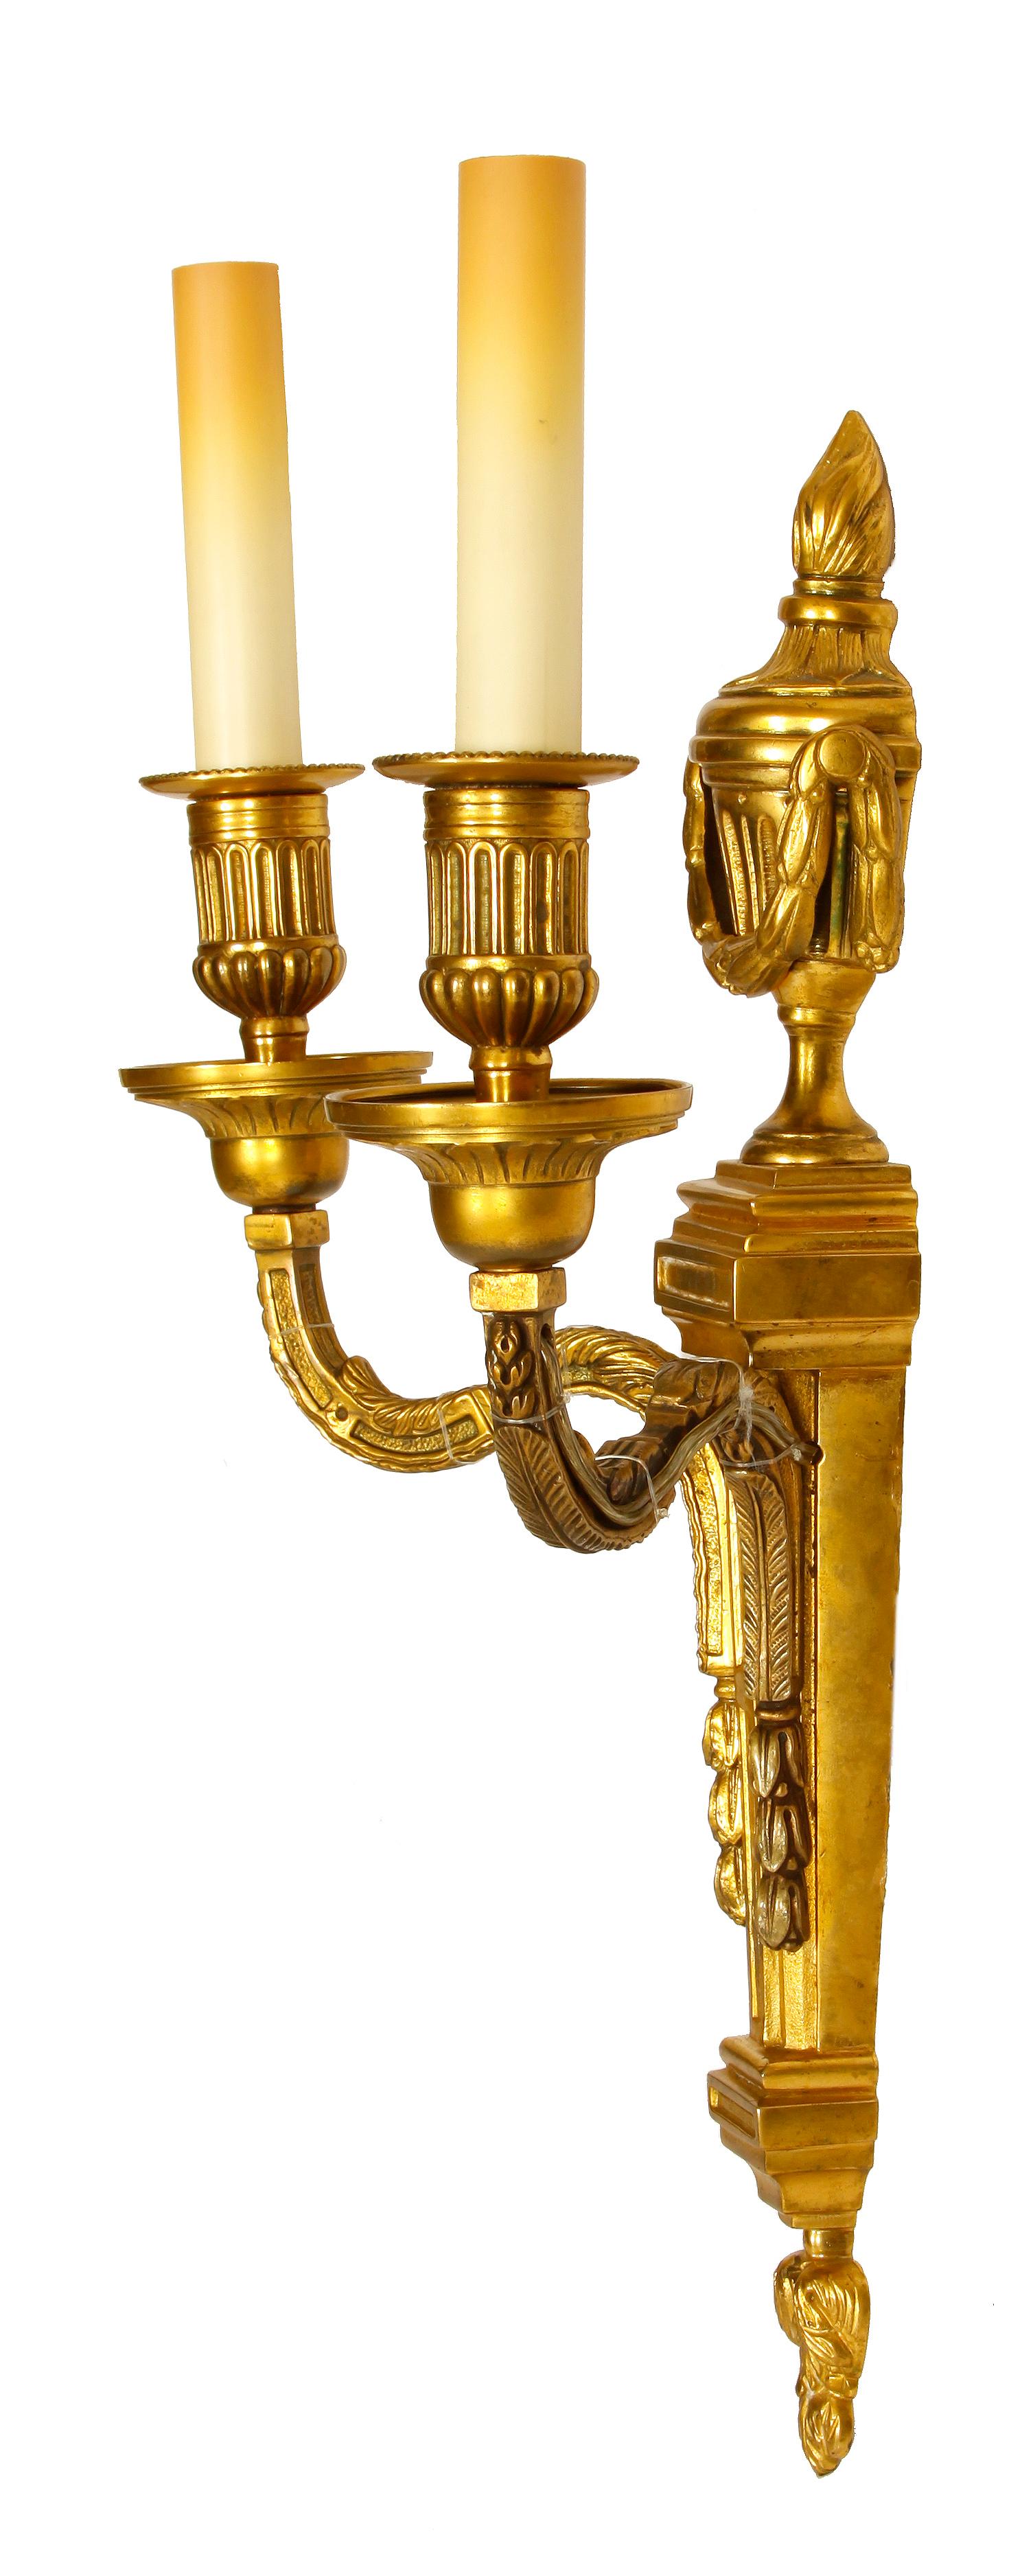 Pair of bronze Louis XVI style sconces with urns and garland motif.